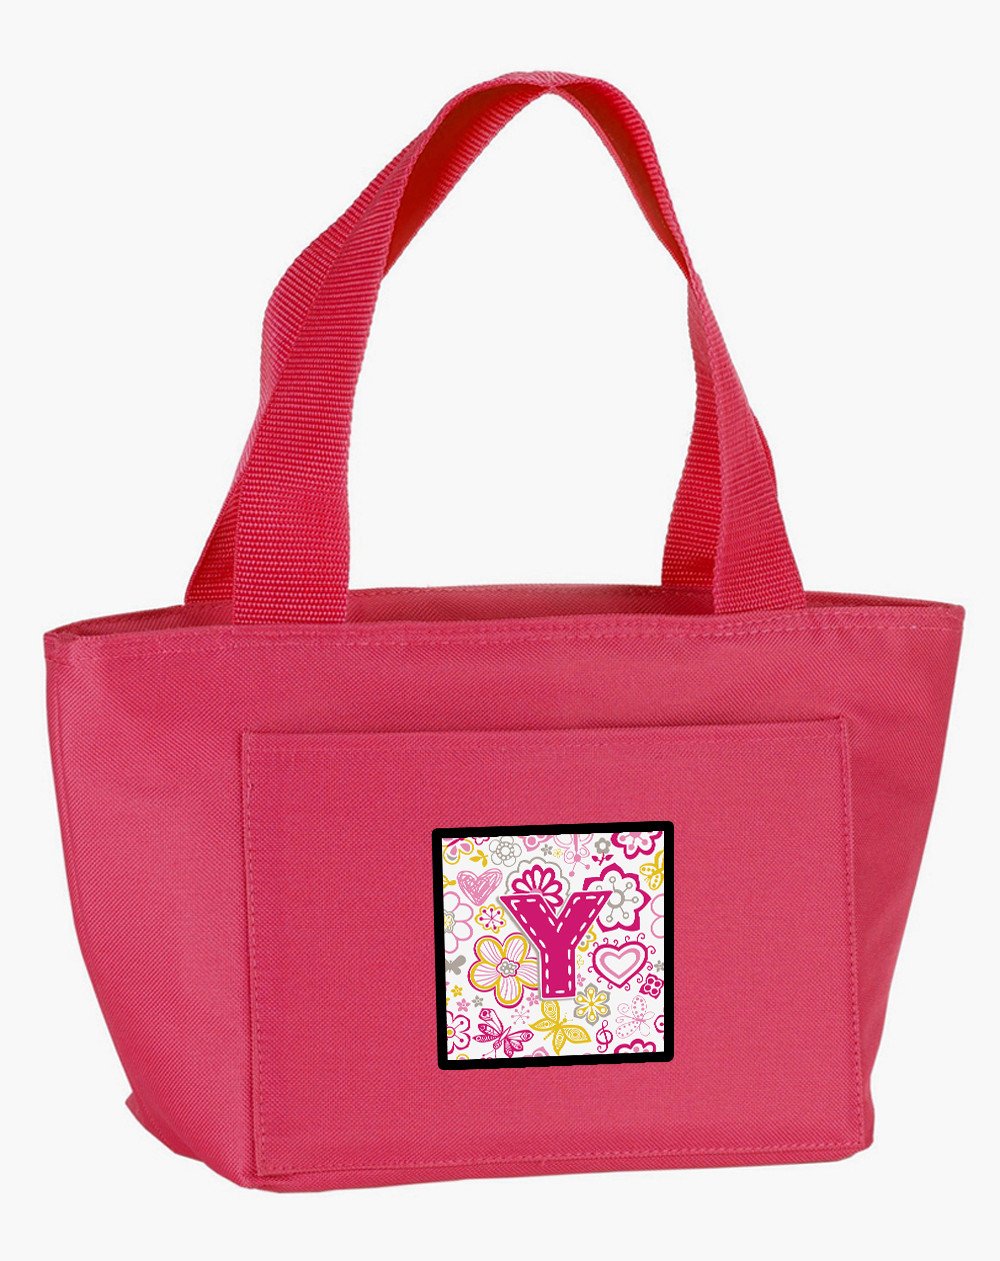 Letter Y Flowers and Butterflies Pink Lunch Bag CJ2005-YPK-8808 by Caroline's Treasures